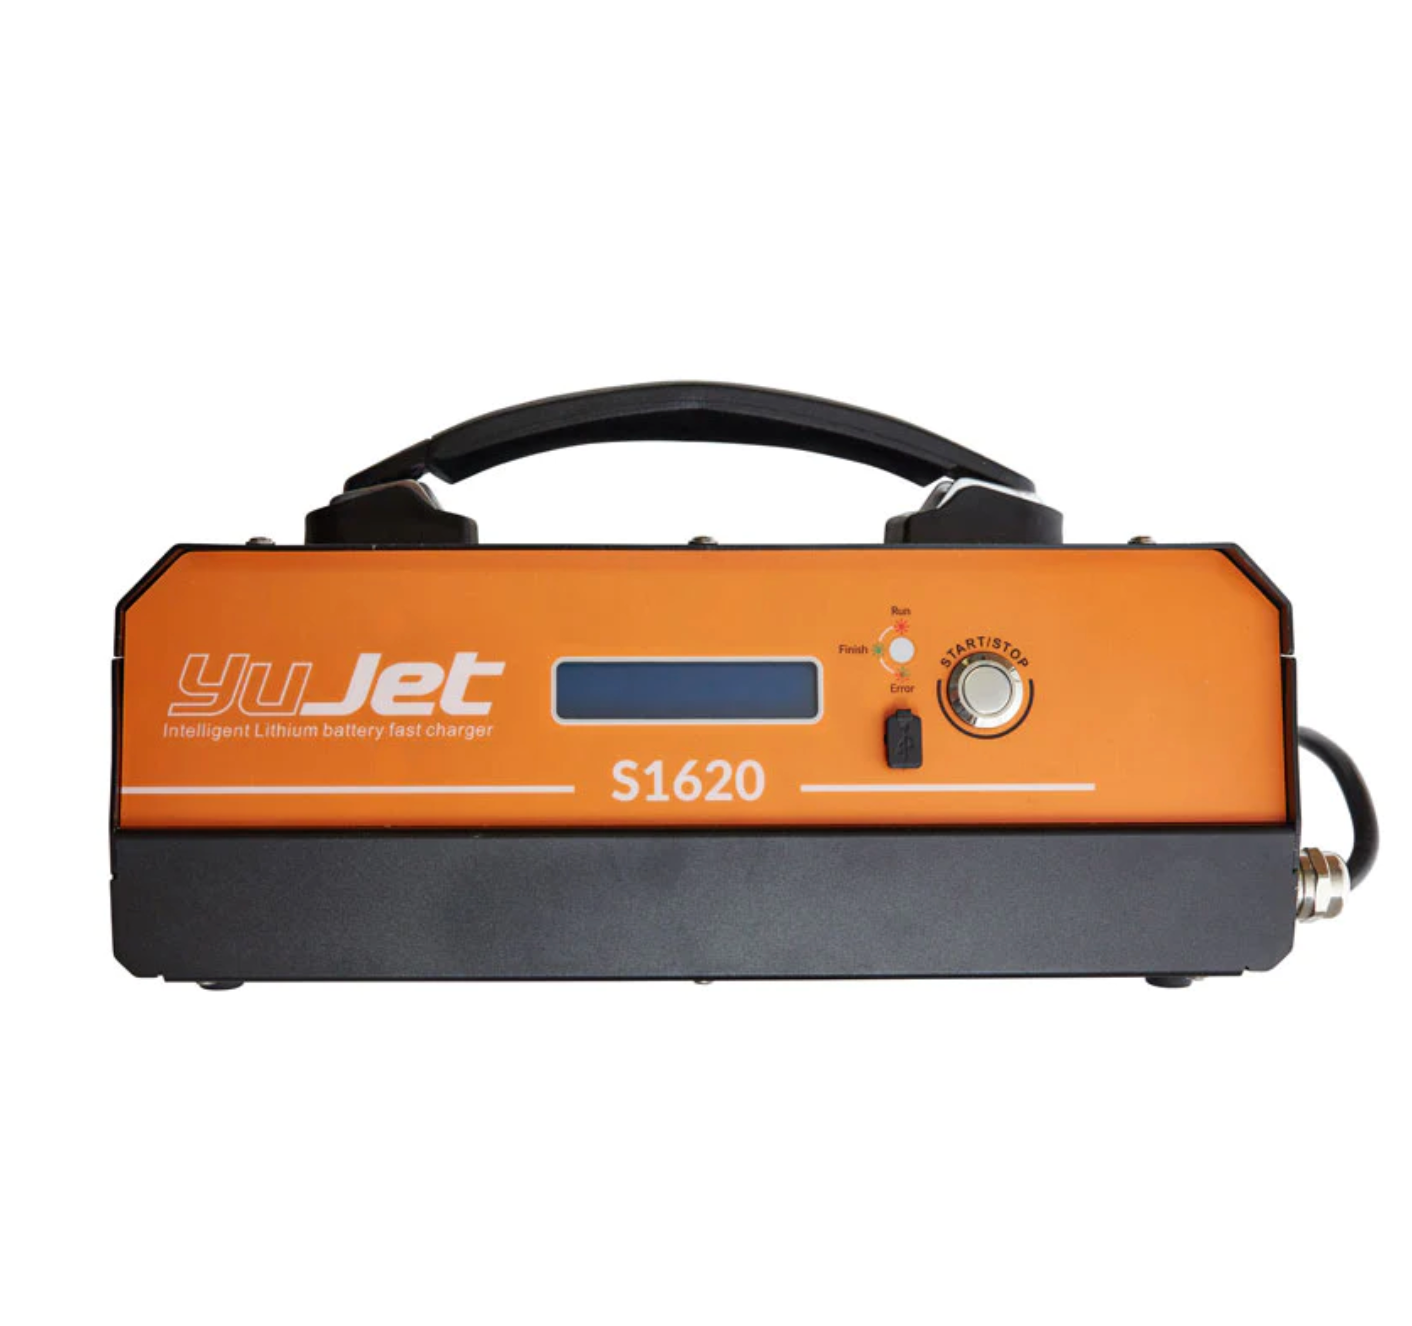 YuJet Battery Charger